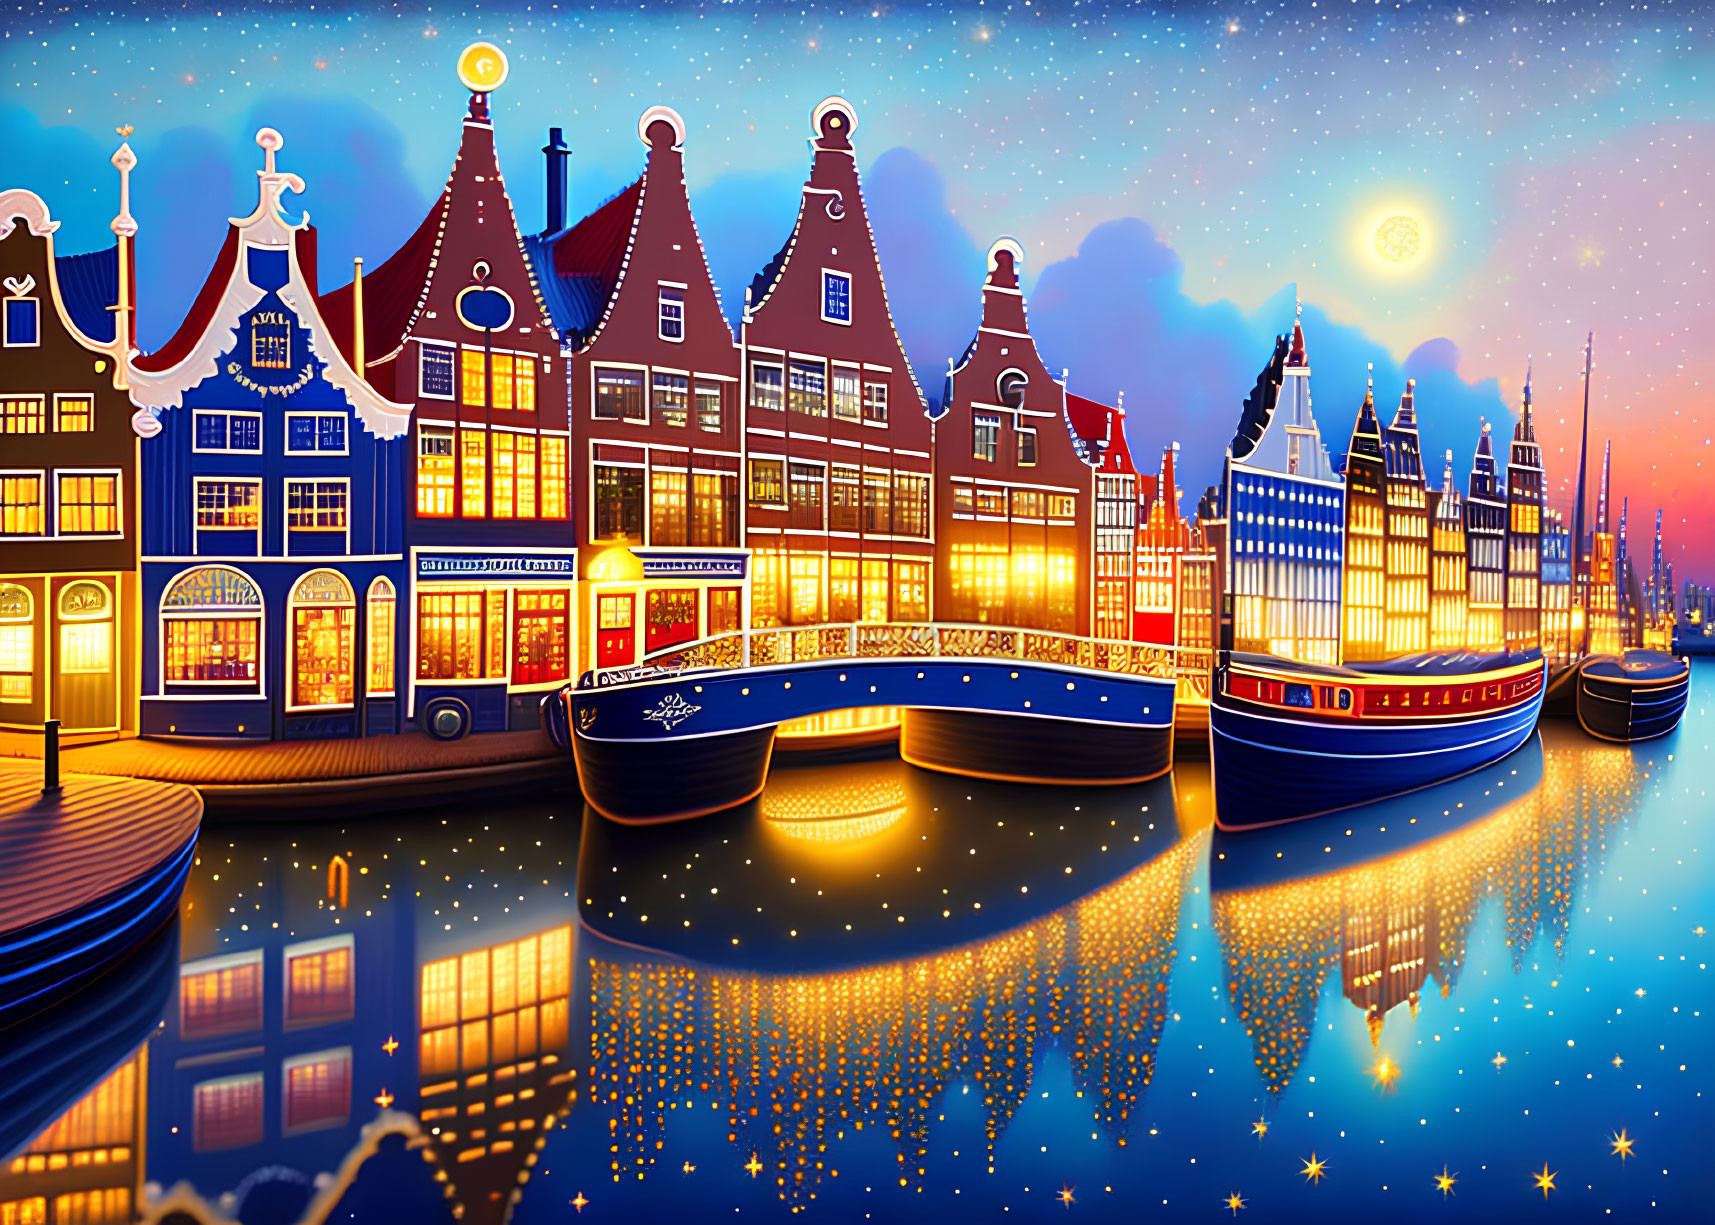 Vibrant Amsterdam canal houses and boats at night with starlit sky and water reflections